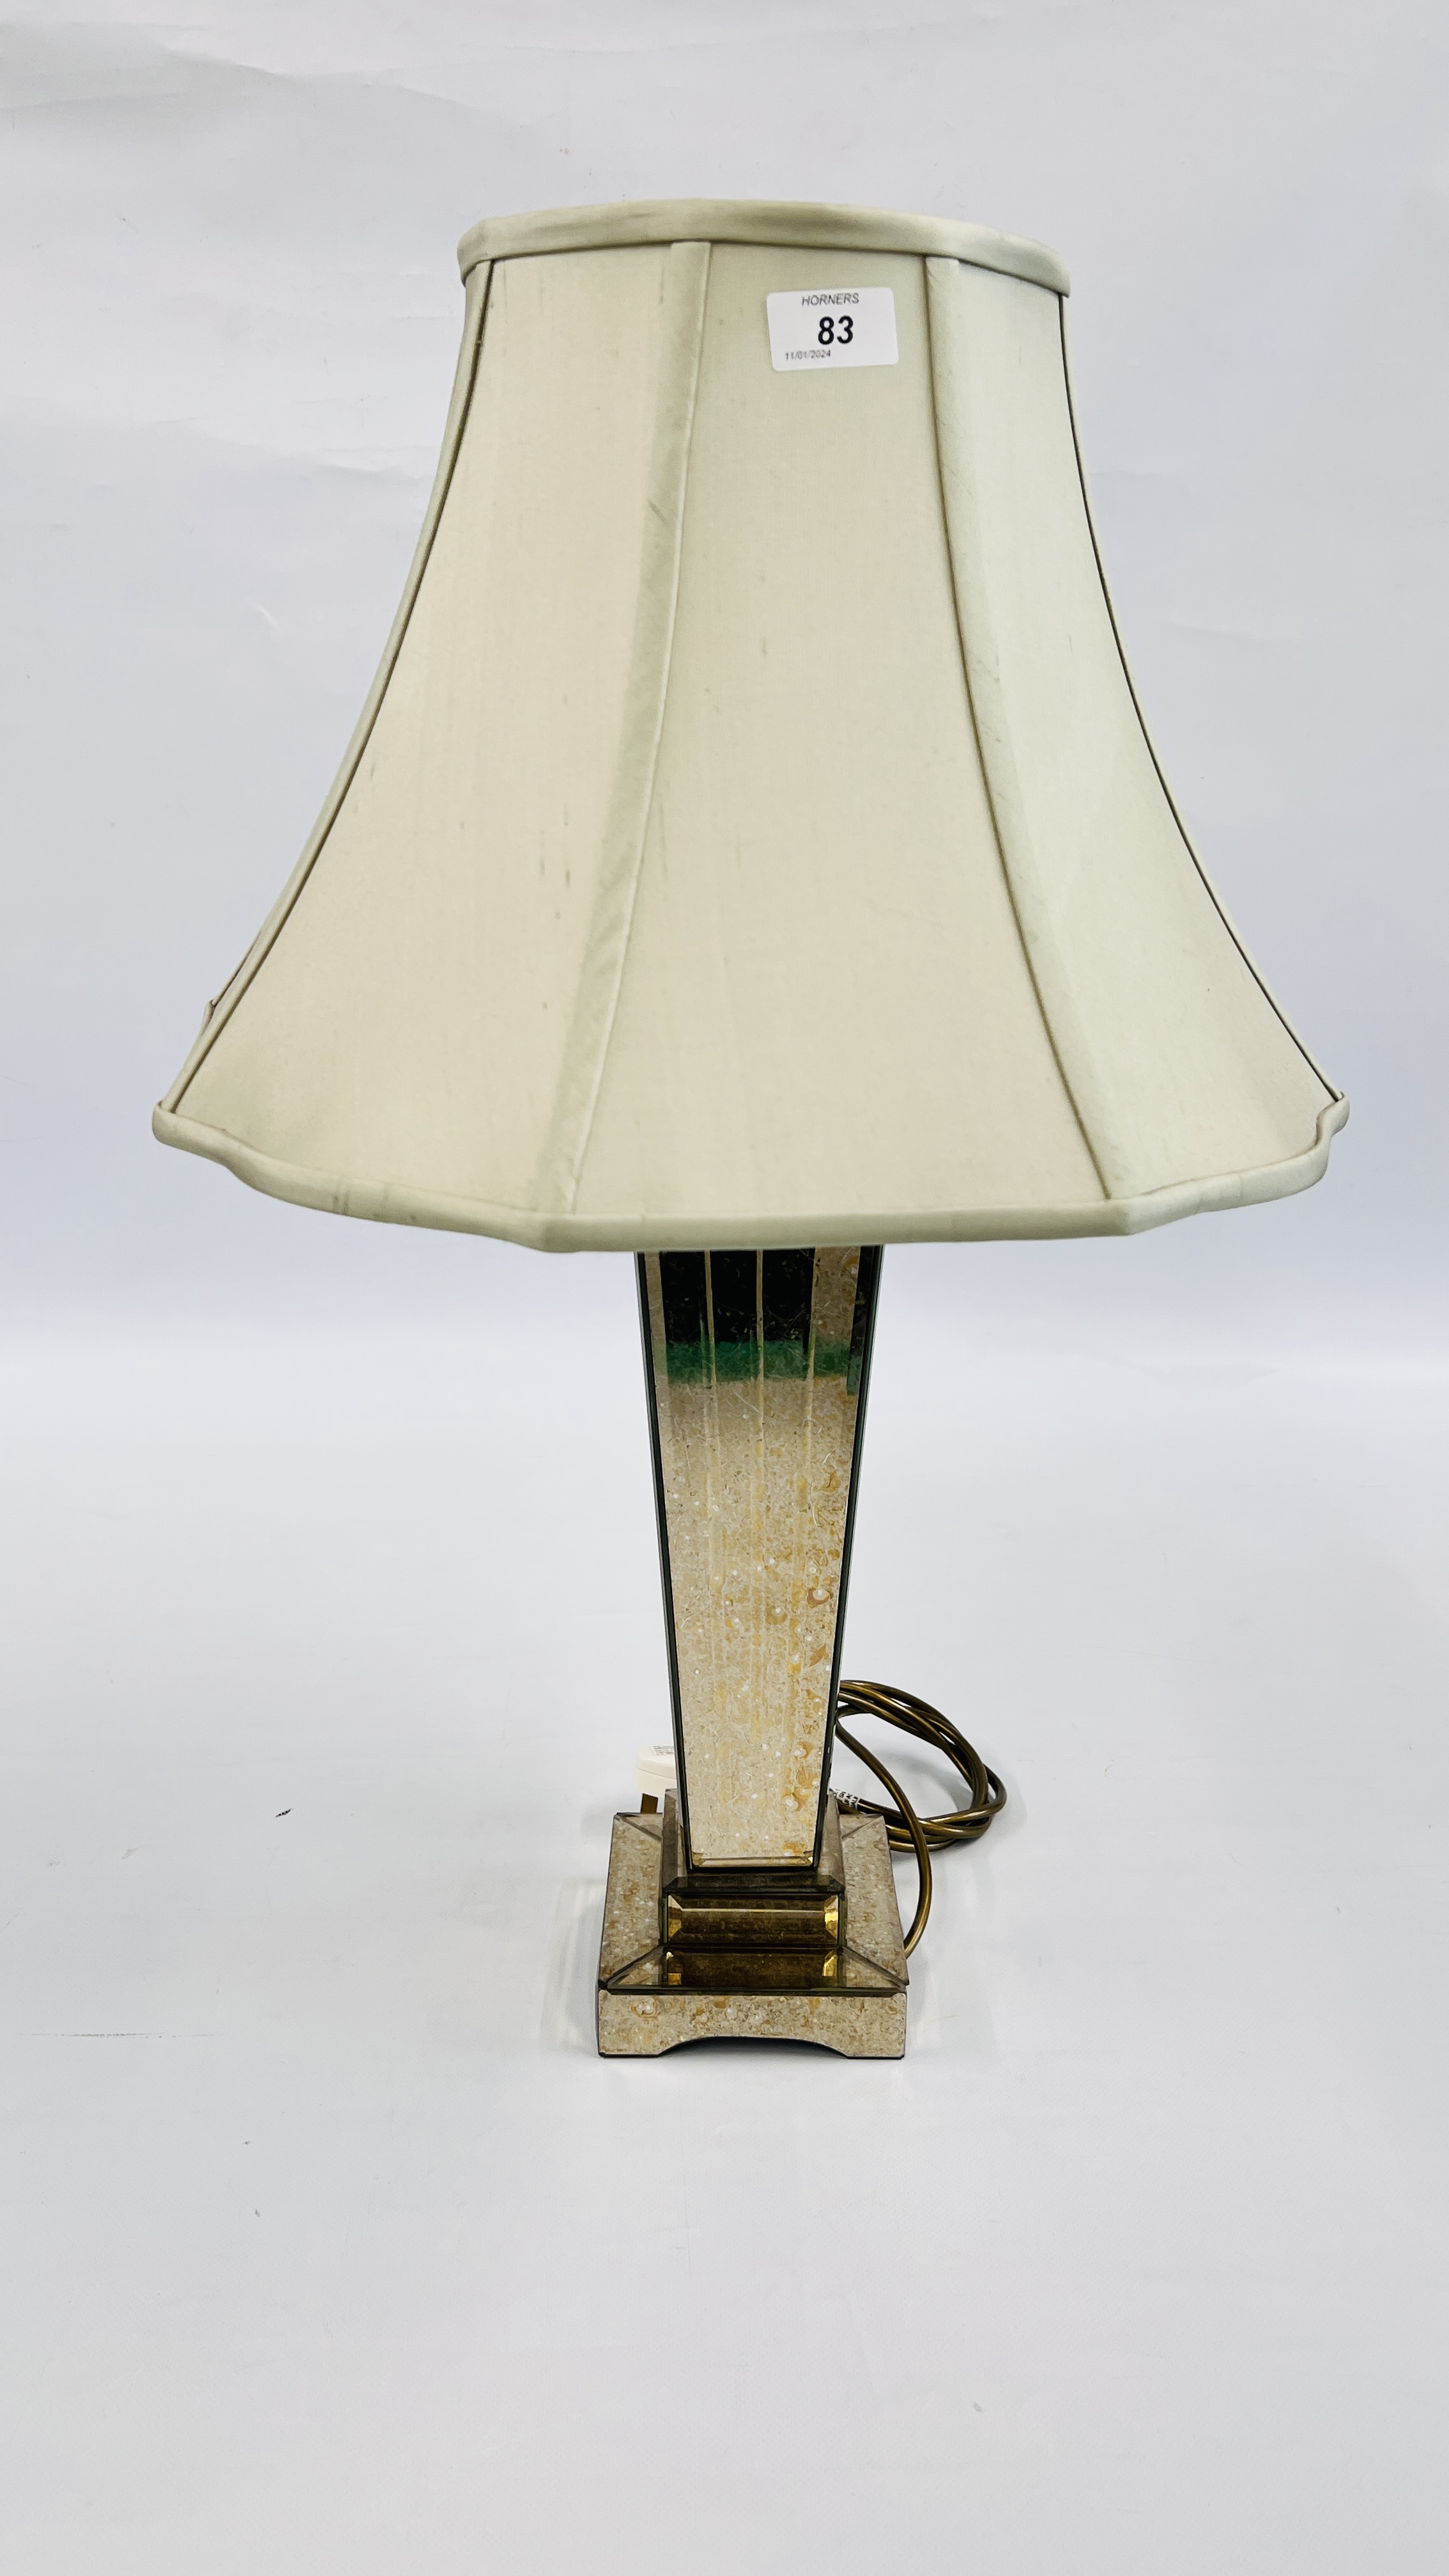 DESIGNER TAPERED MIRRORED BASE TABLE LAMP WITH PLEATED SHADE - SOLD AS SEEN.